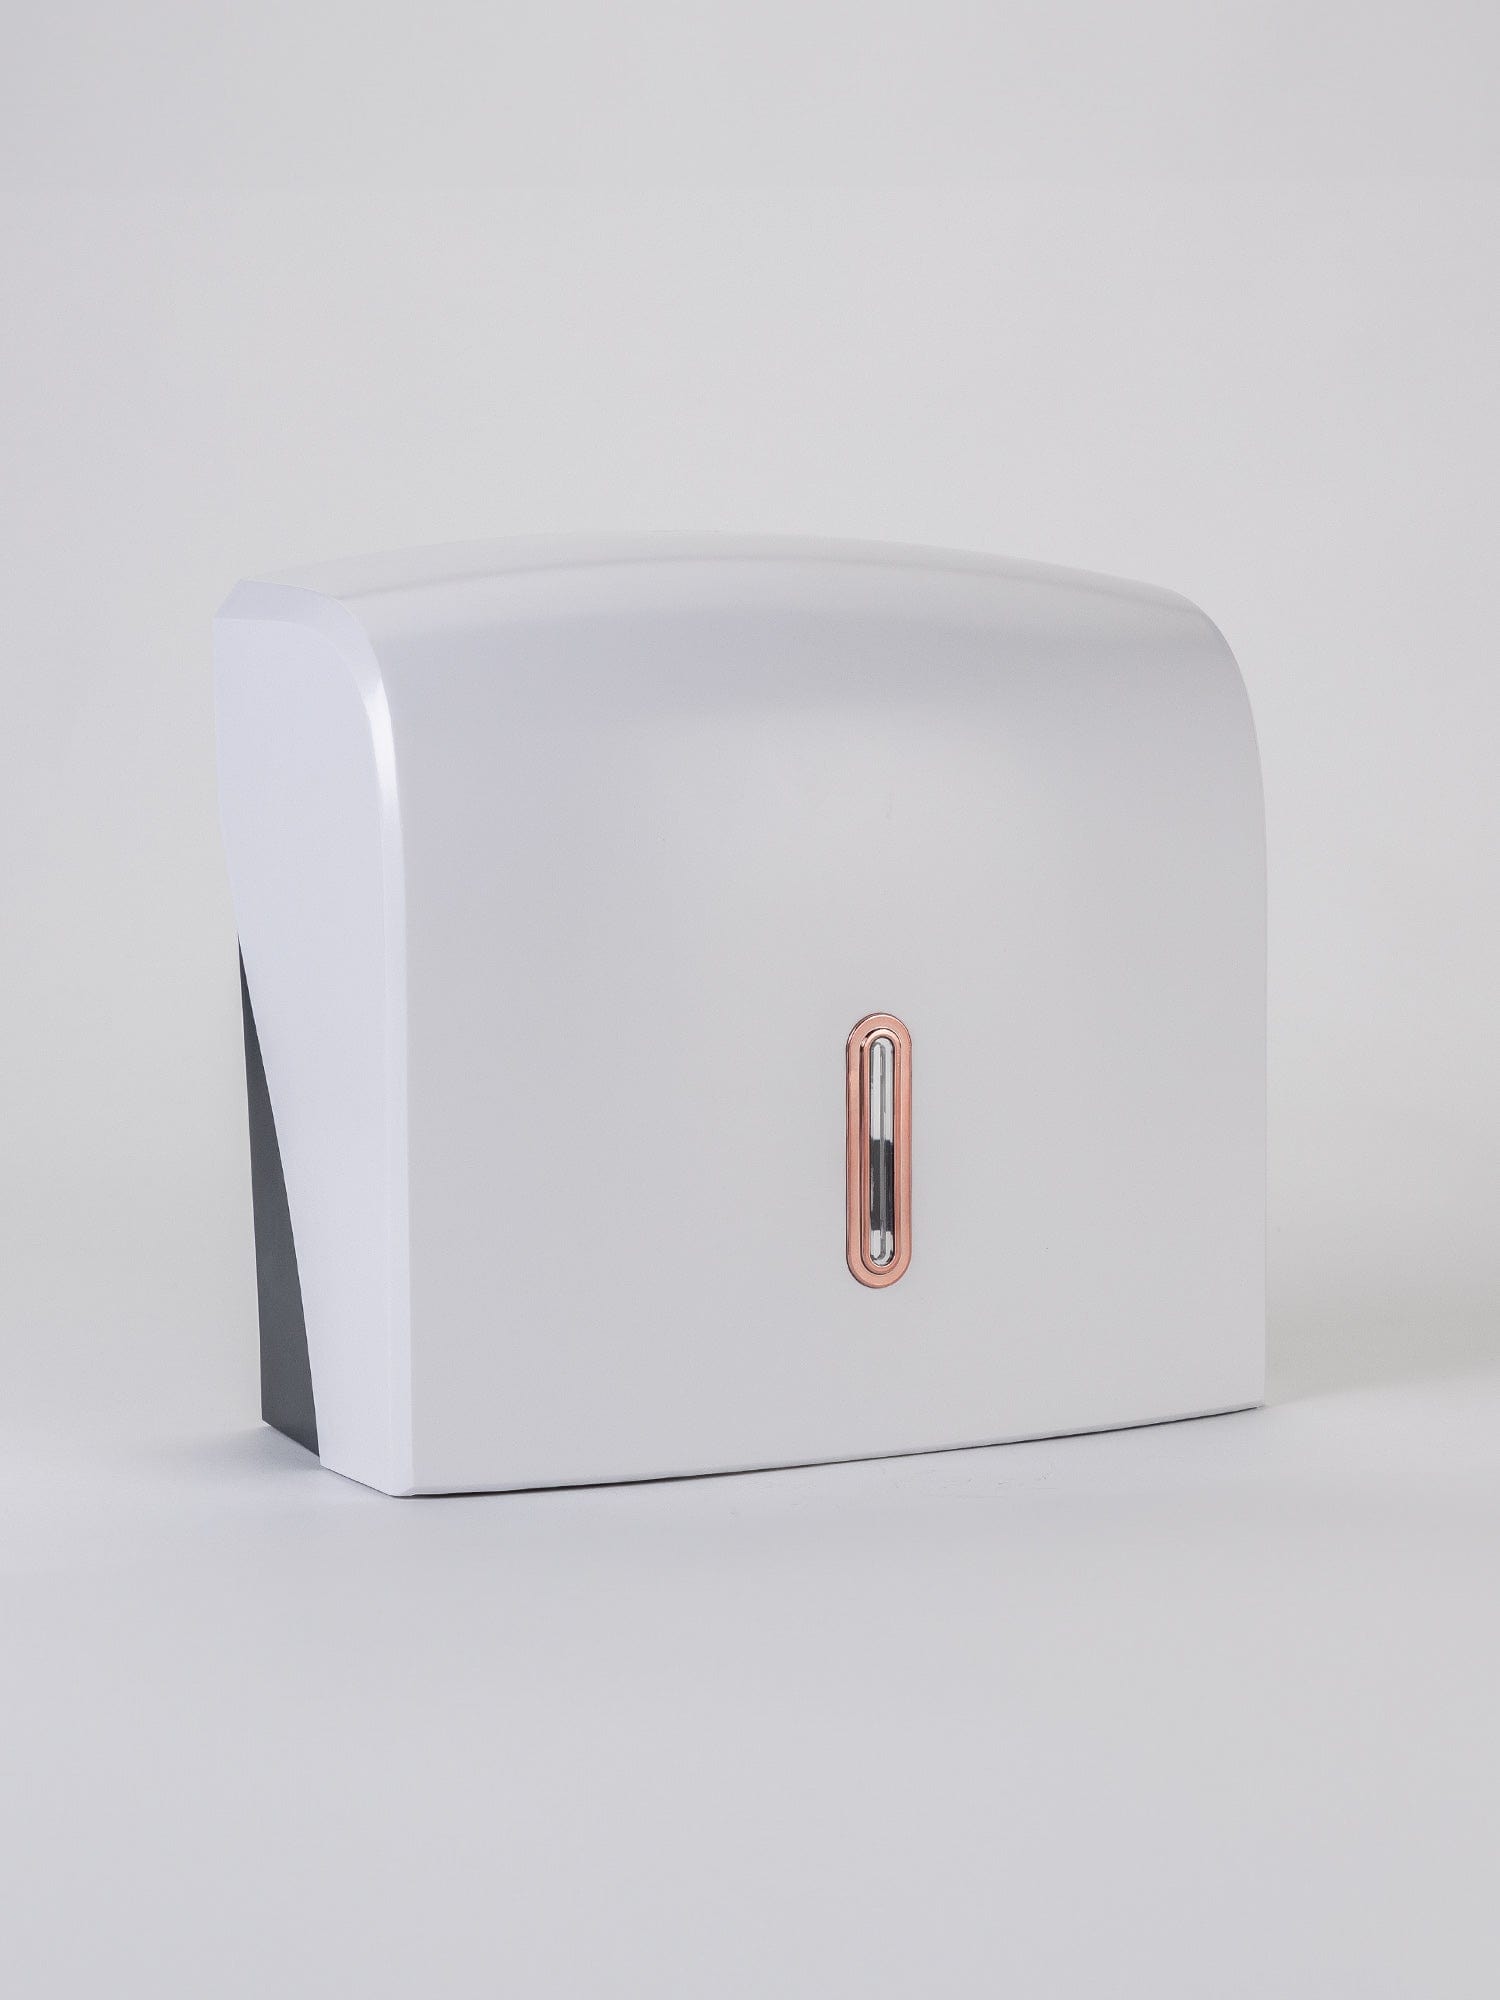 rose gold halo small hand towel dispensers